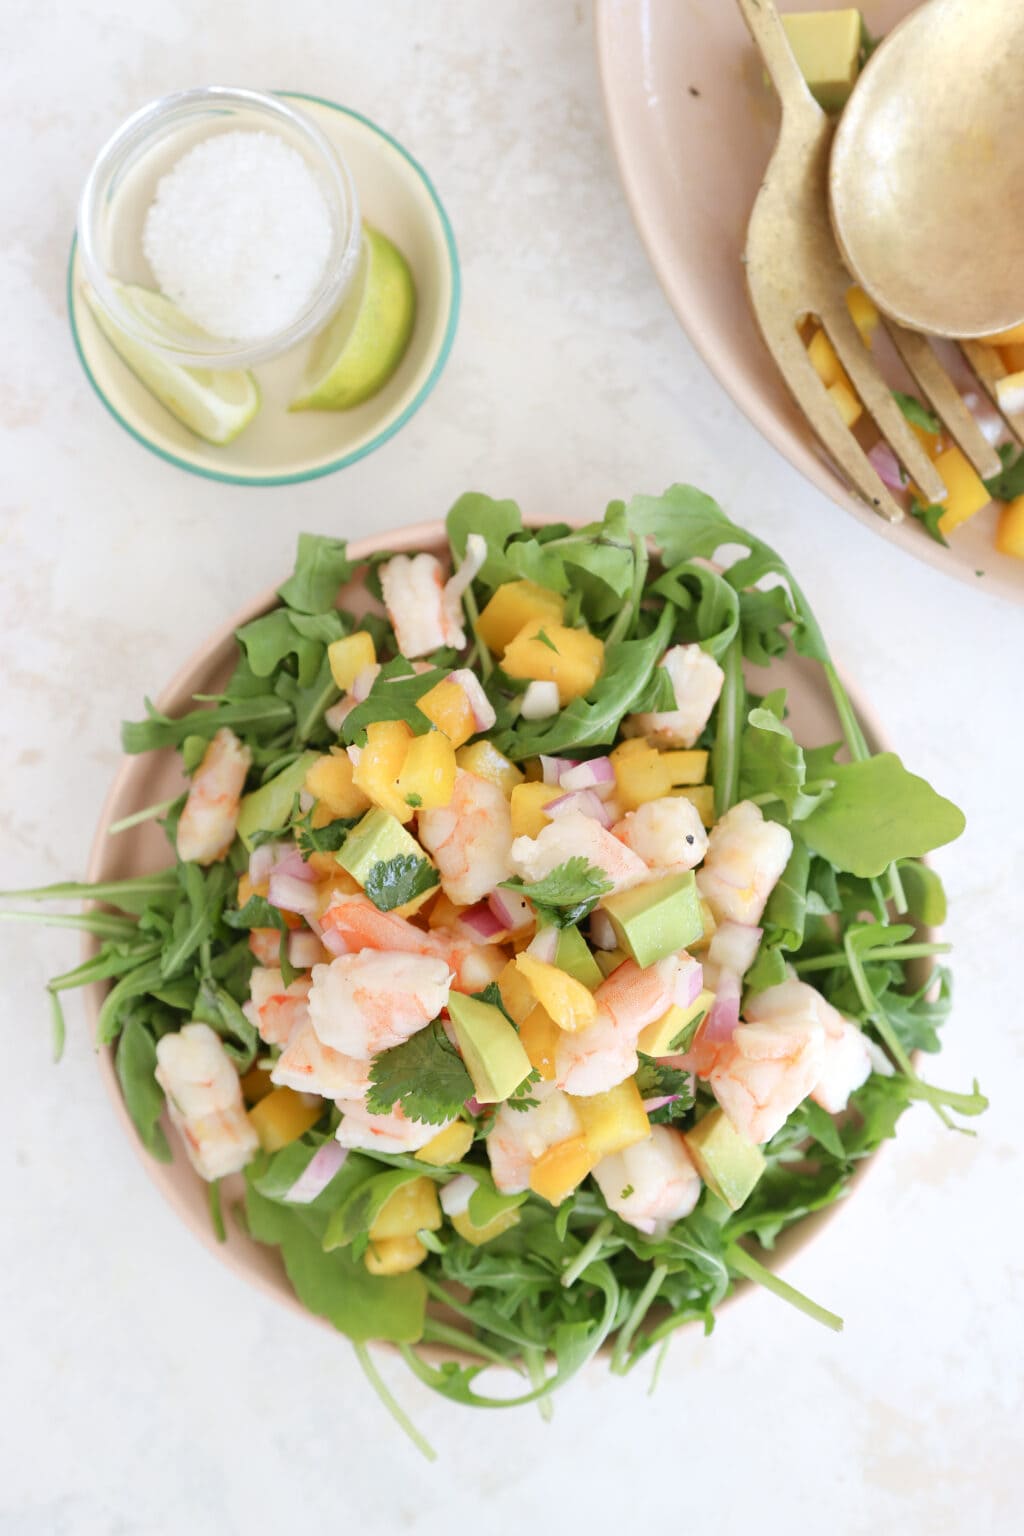 A pink plate with a heaping serving of salad that has arugula, avocado, mango, and shrimp. In the background is a platter of the same salad and two gold serving spoons.